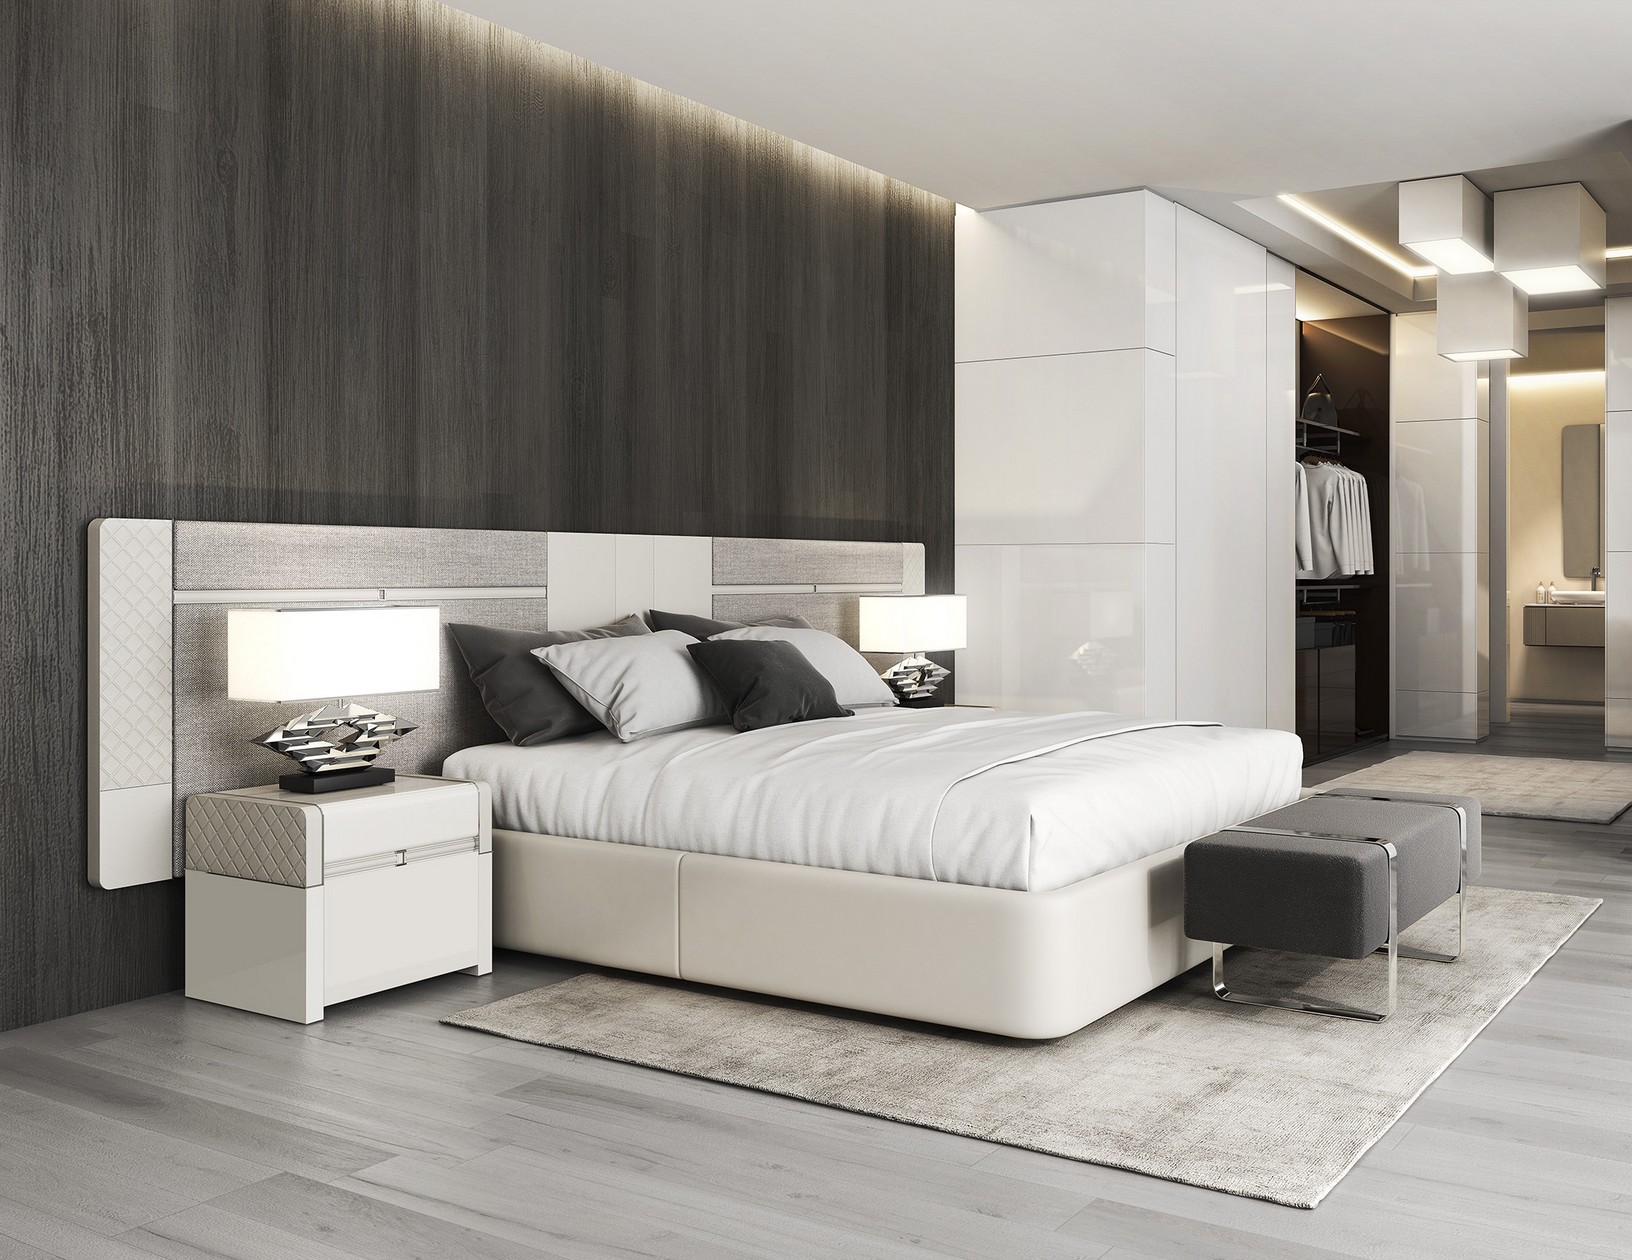 Contemporary bedroom project